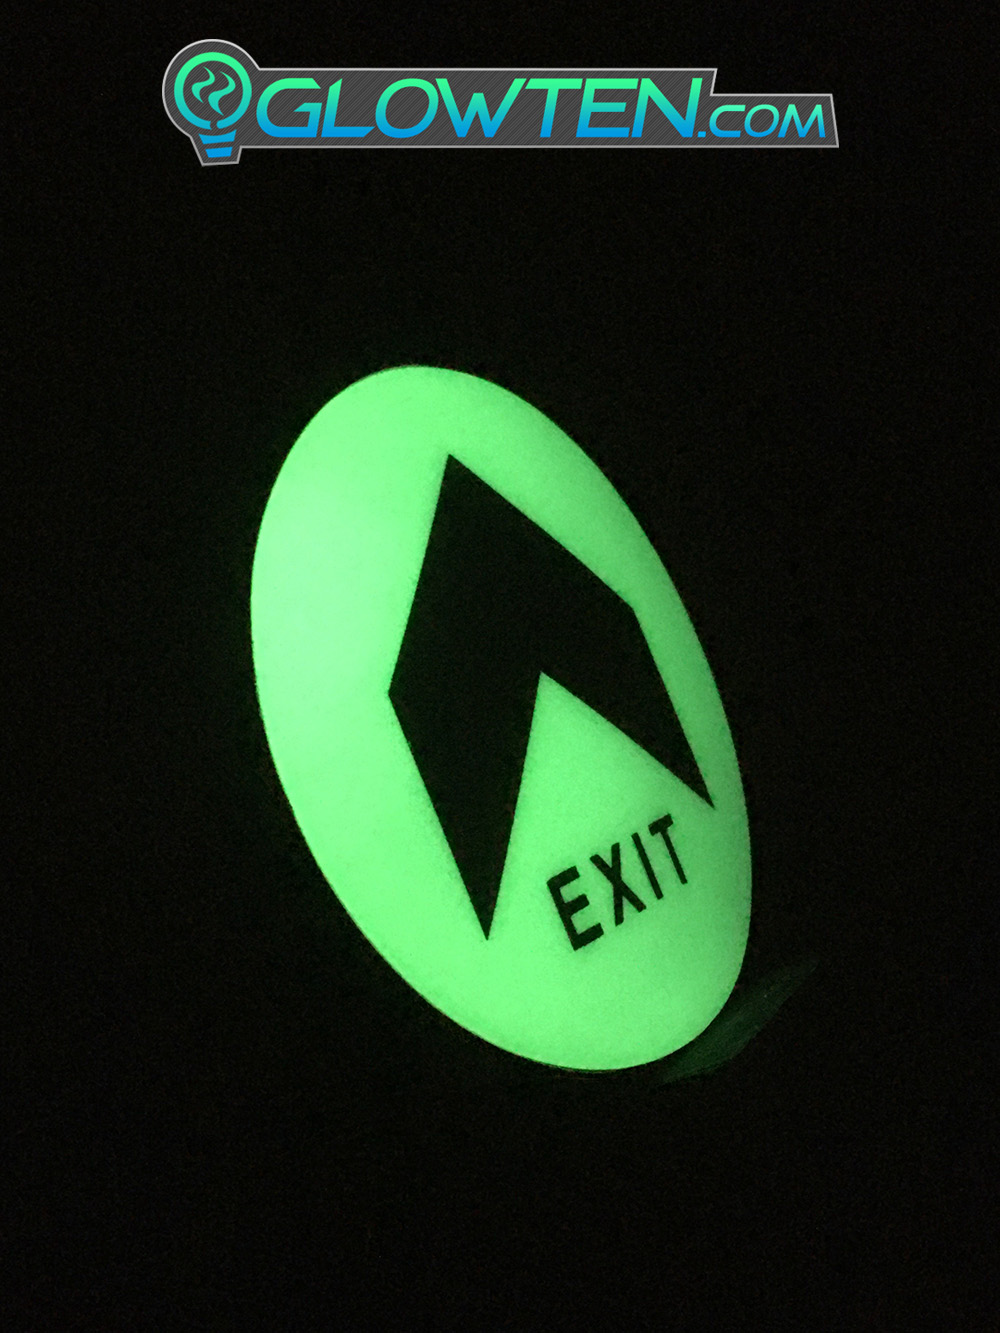 GLOWTEN.com - Dark Places Prevent Falling Large Arrow Fire Exit Sign Emergency Glow In The Dark Eco Friendly Photoluminescent Pigment Pvc Plastic With Adhesive picture photo cap preview pic 6